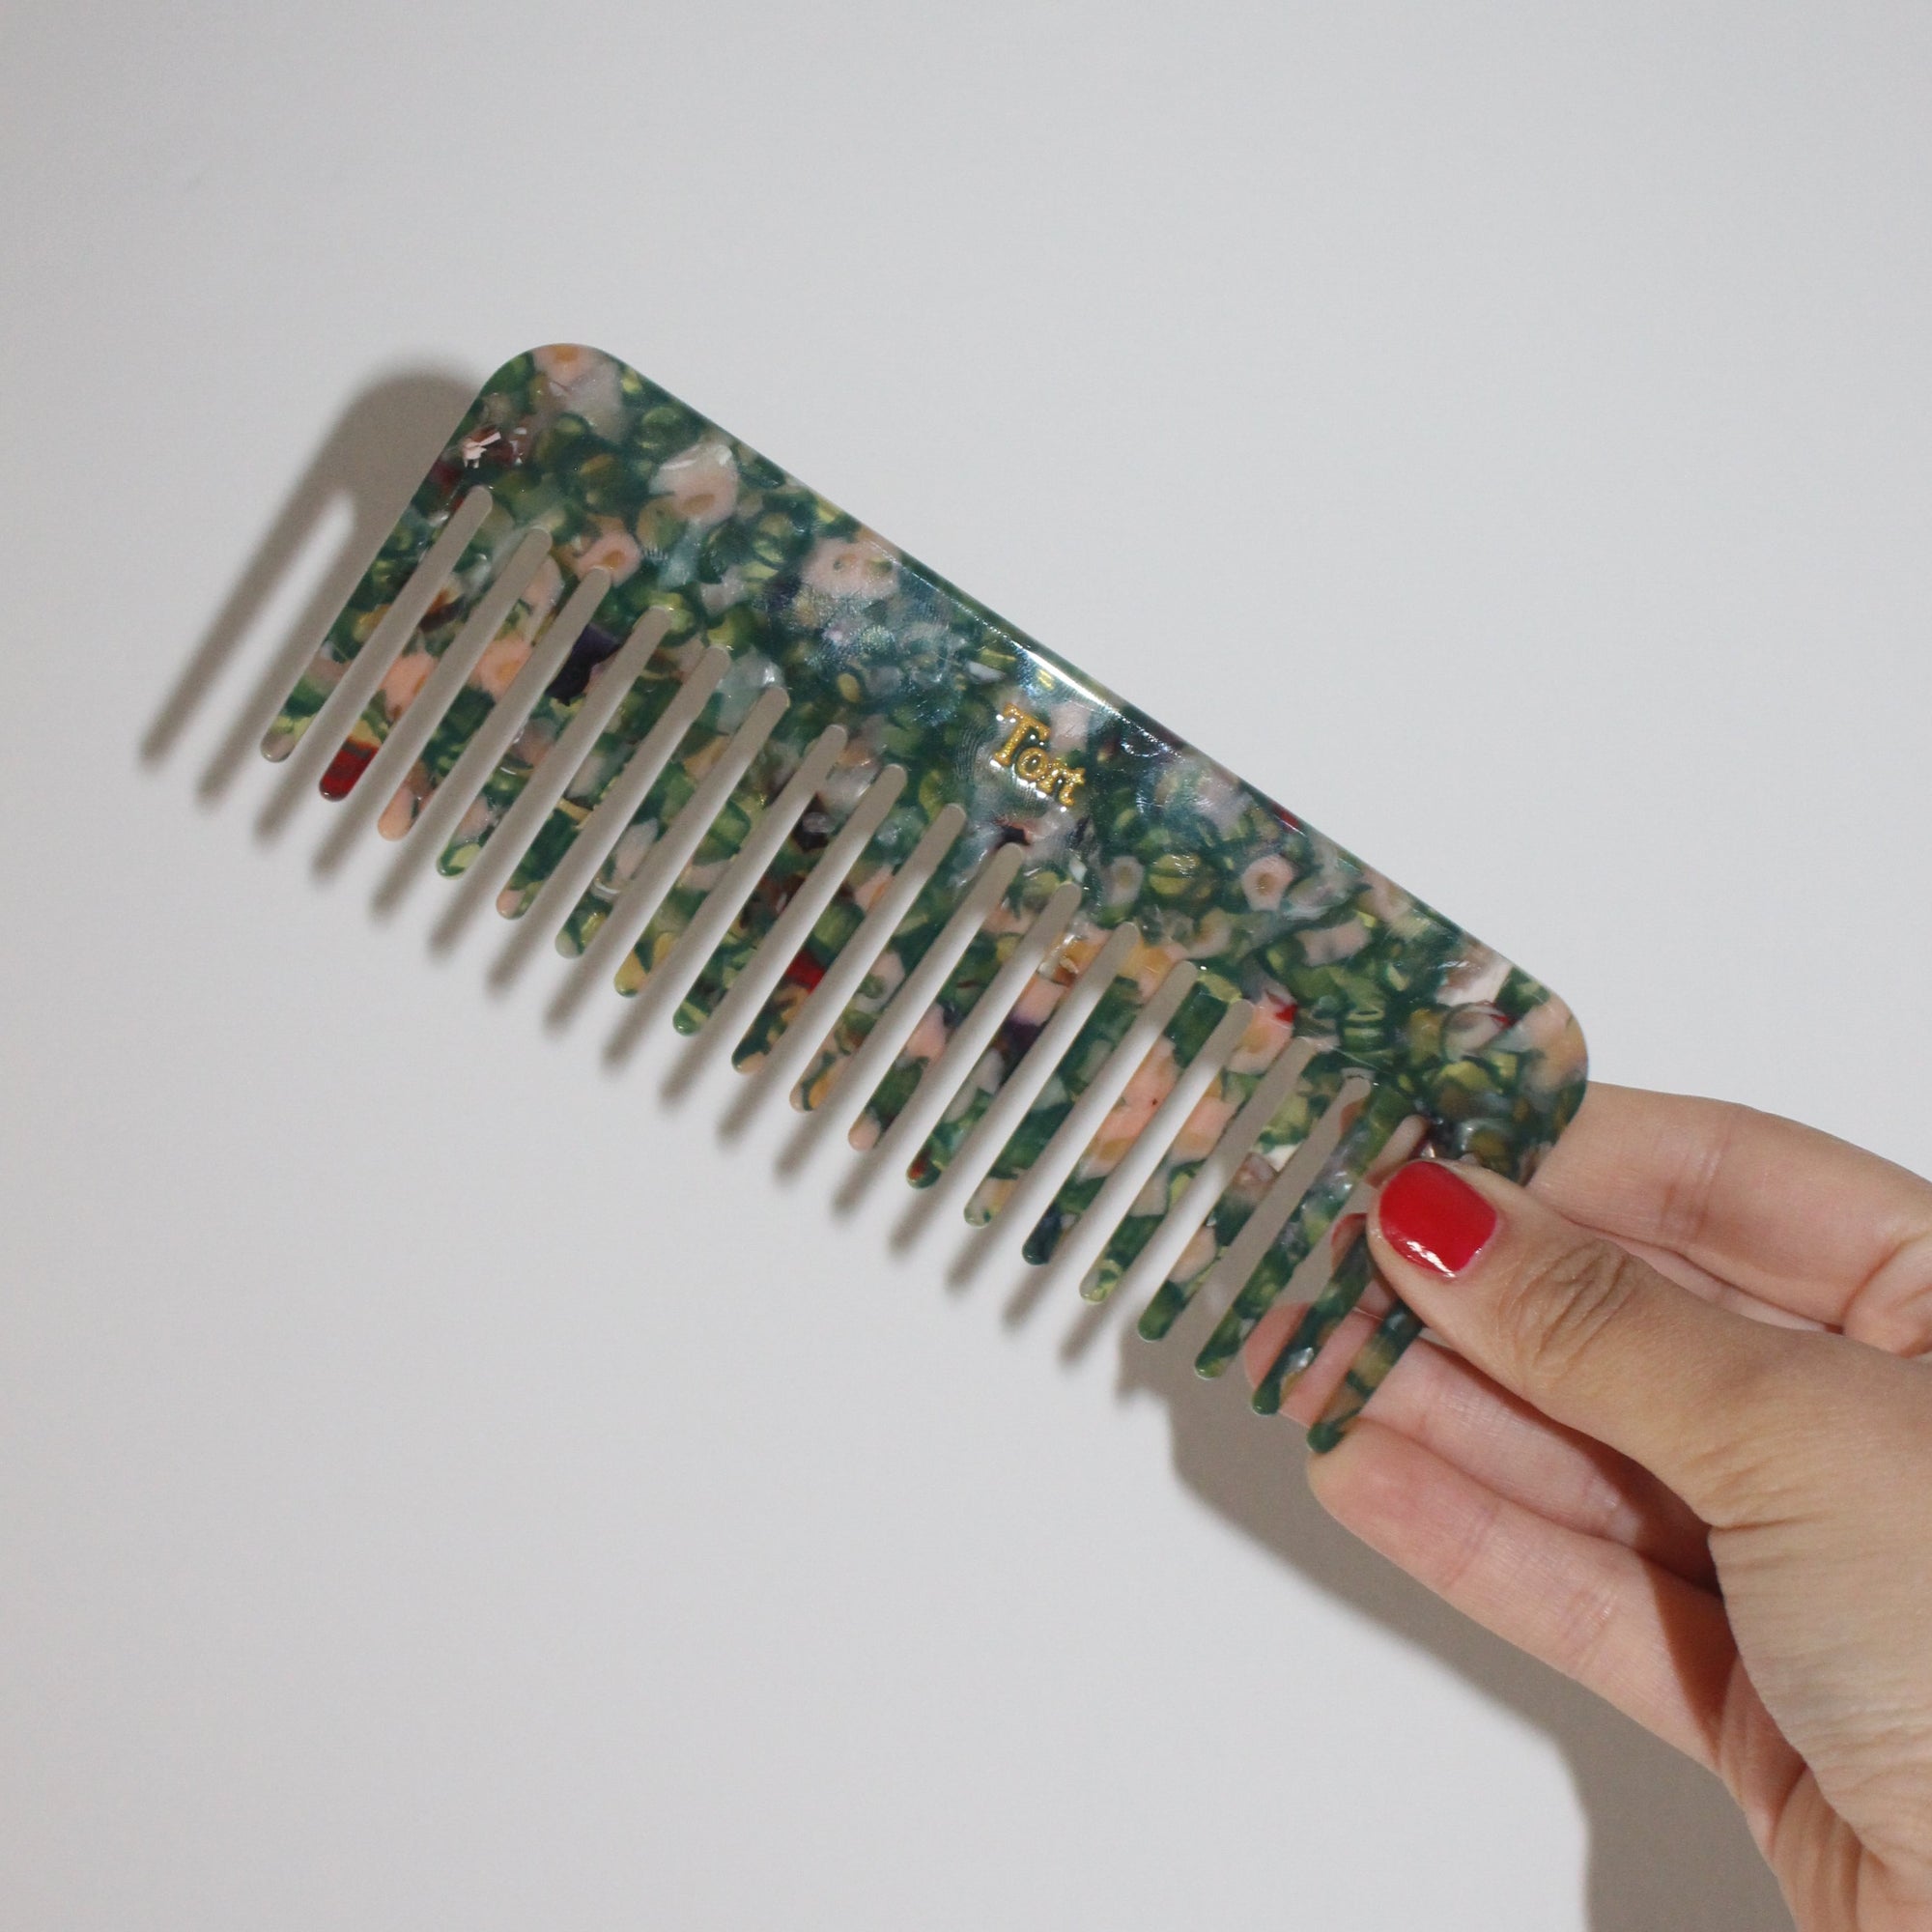 Meet ELVA!  A sturdy round-edged rectangle comb made from eco-resin. Designed with medium positioned rounded teeth so that hair retains texture and strength. Glides through wet or dry hair to untangle or tease after curling with tongs or straighteners, while preventing breakage, split ends and frizz.   Each comb comes in a branded Tort pouch (colours change seasonally).  Size: 15cm  Colour: translucent green and peachy-pink  Material: eco-resin  Combs are non-refundable for hygiene reasons.